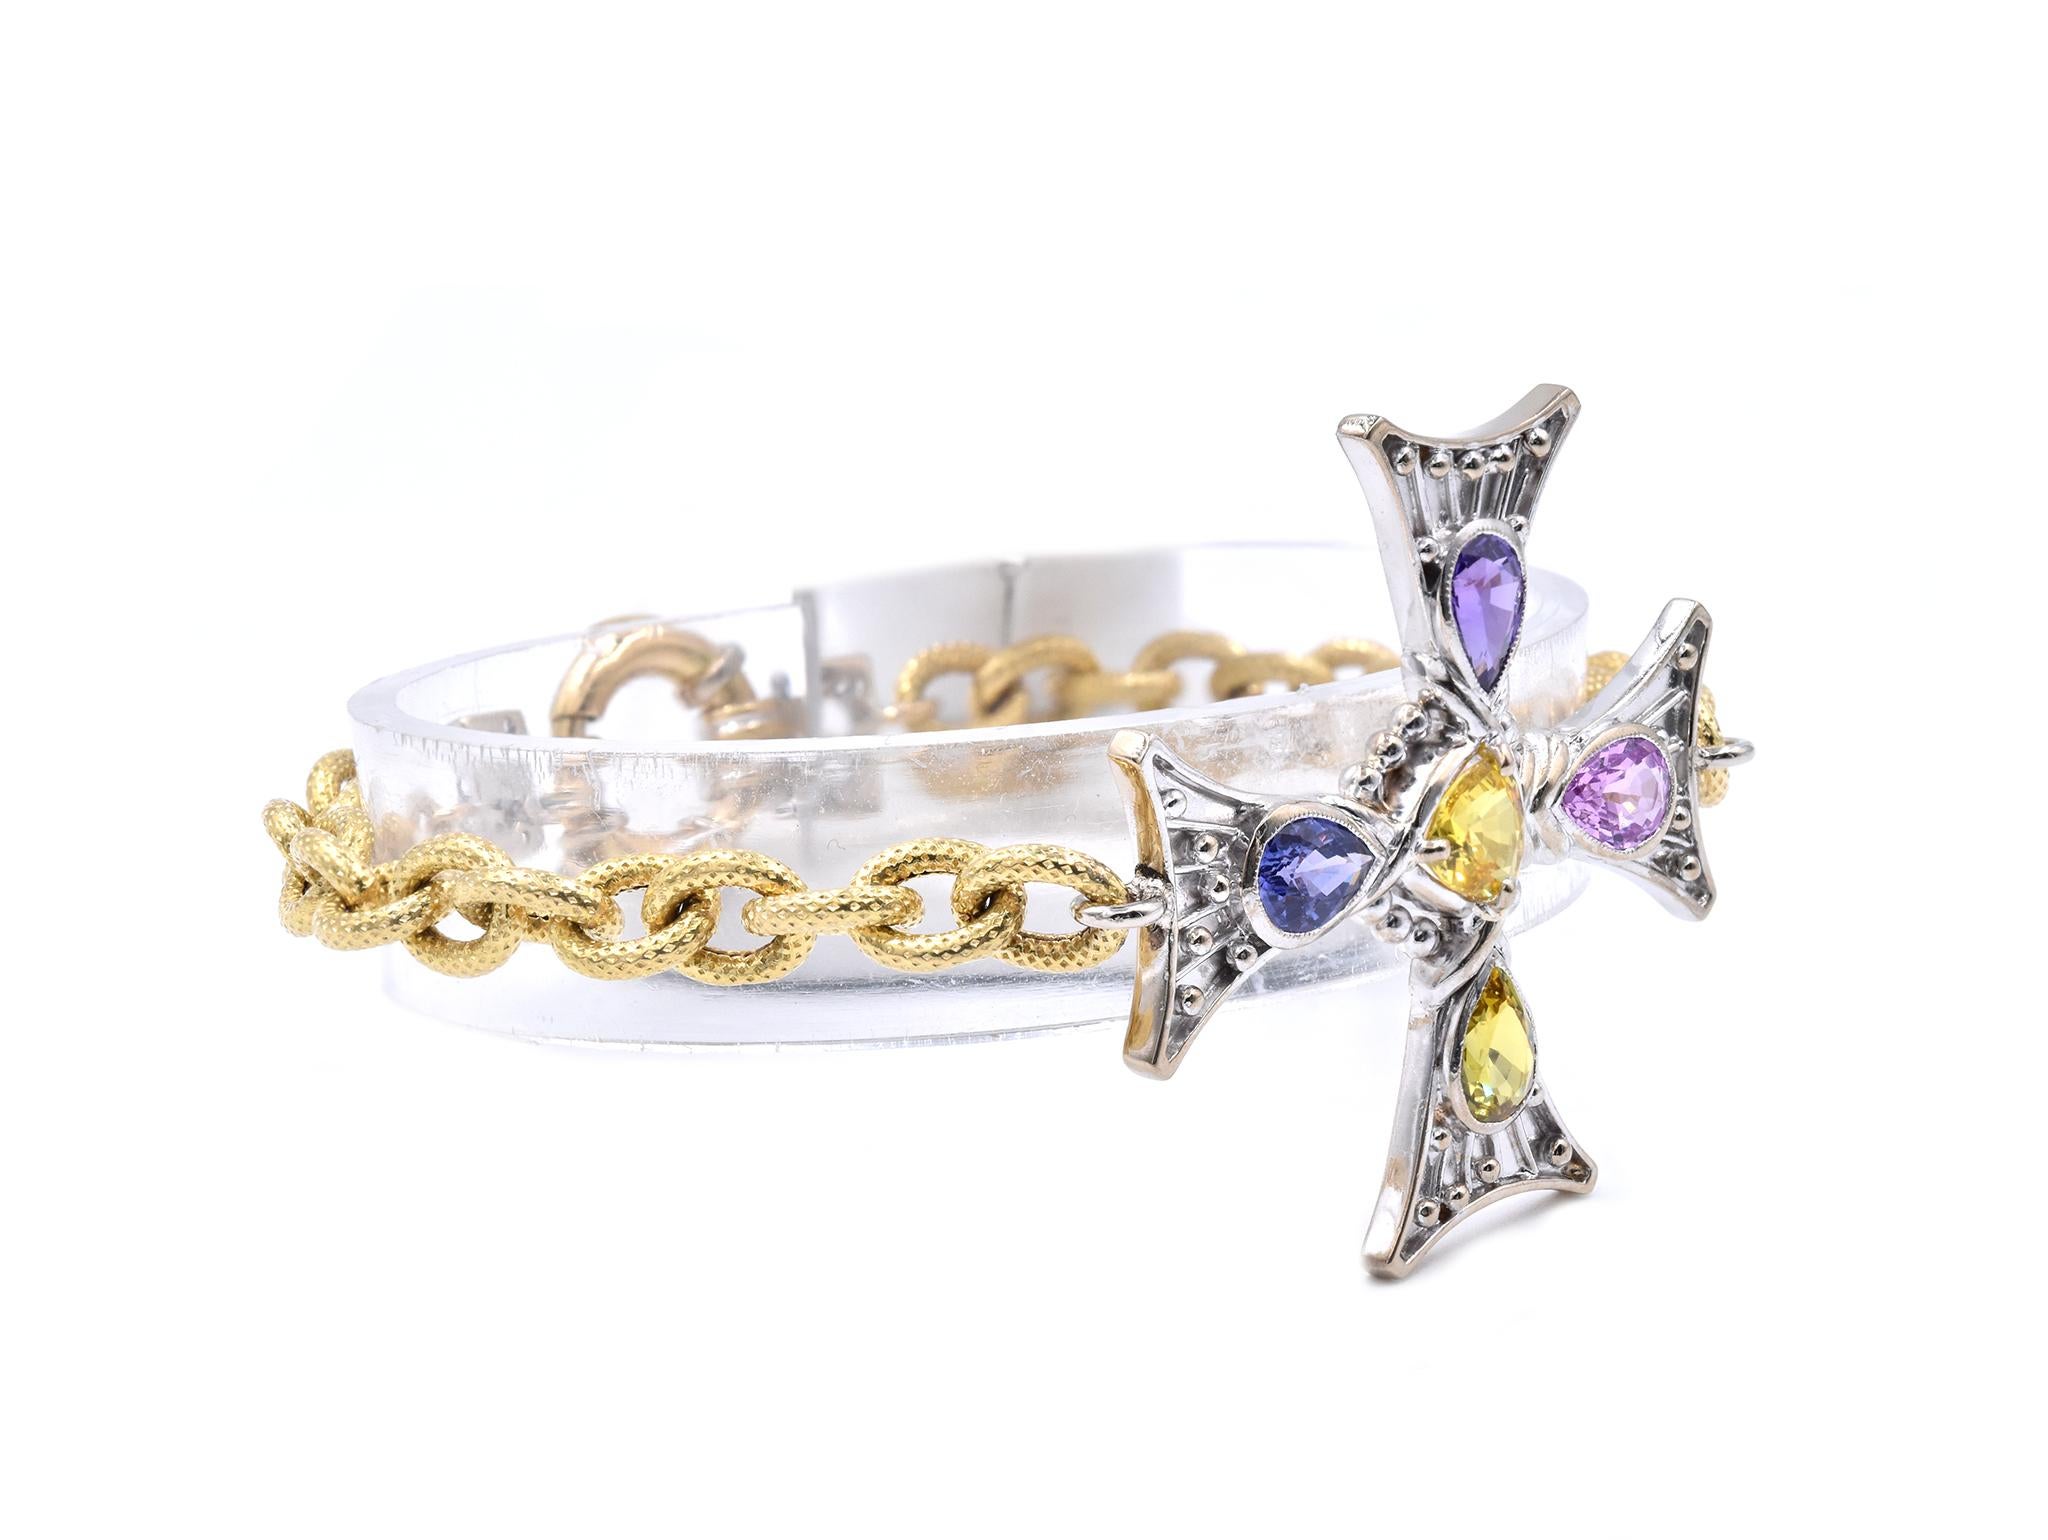 Material: 18K white and yellow gold
Sapphire: pink, green, yellow, violet, and purple
Dimensions: bracelet will fit a 7.5-inch wrist
Weight: 18.39 grams
